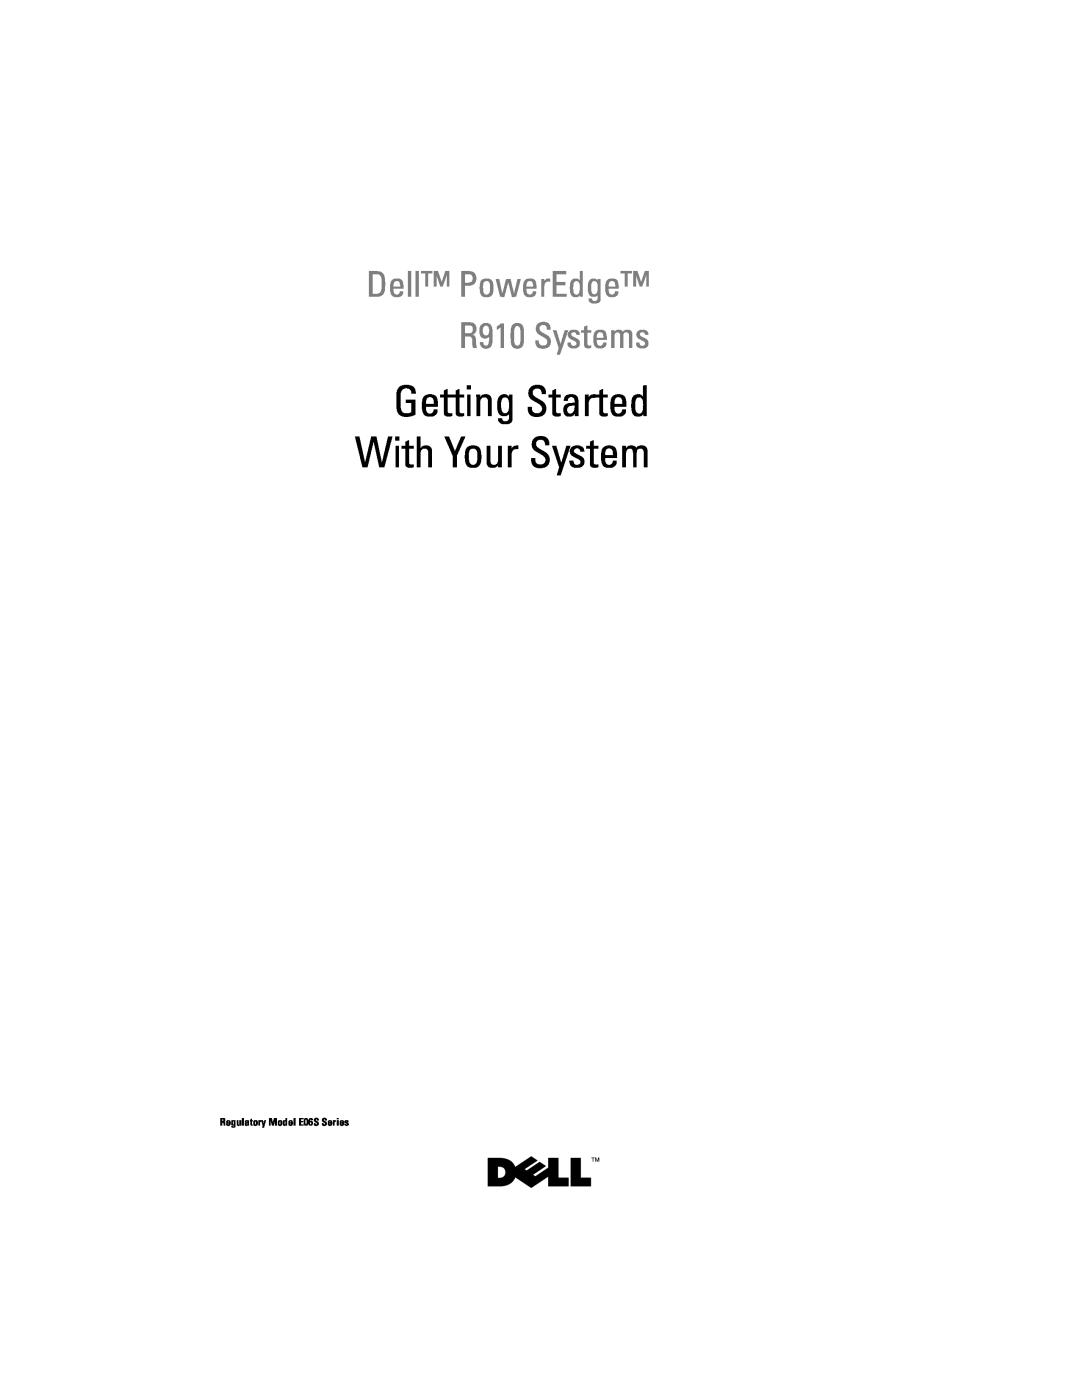 Dell manual Getting Started With Your System, Dell PowerEdge R910 Systems, Regulatory Model E06S Series 